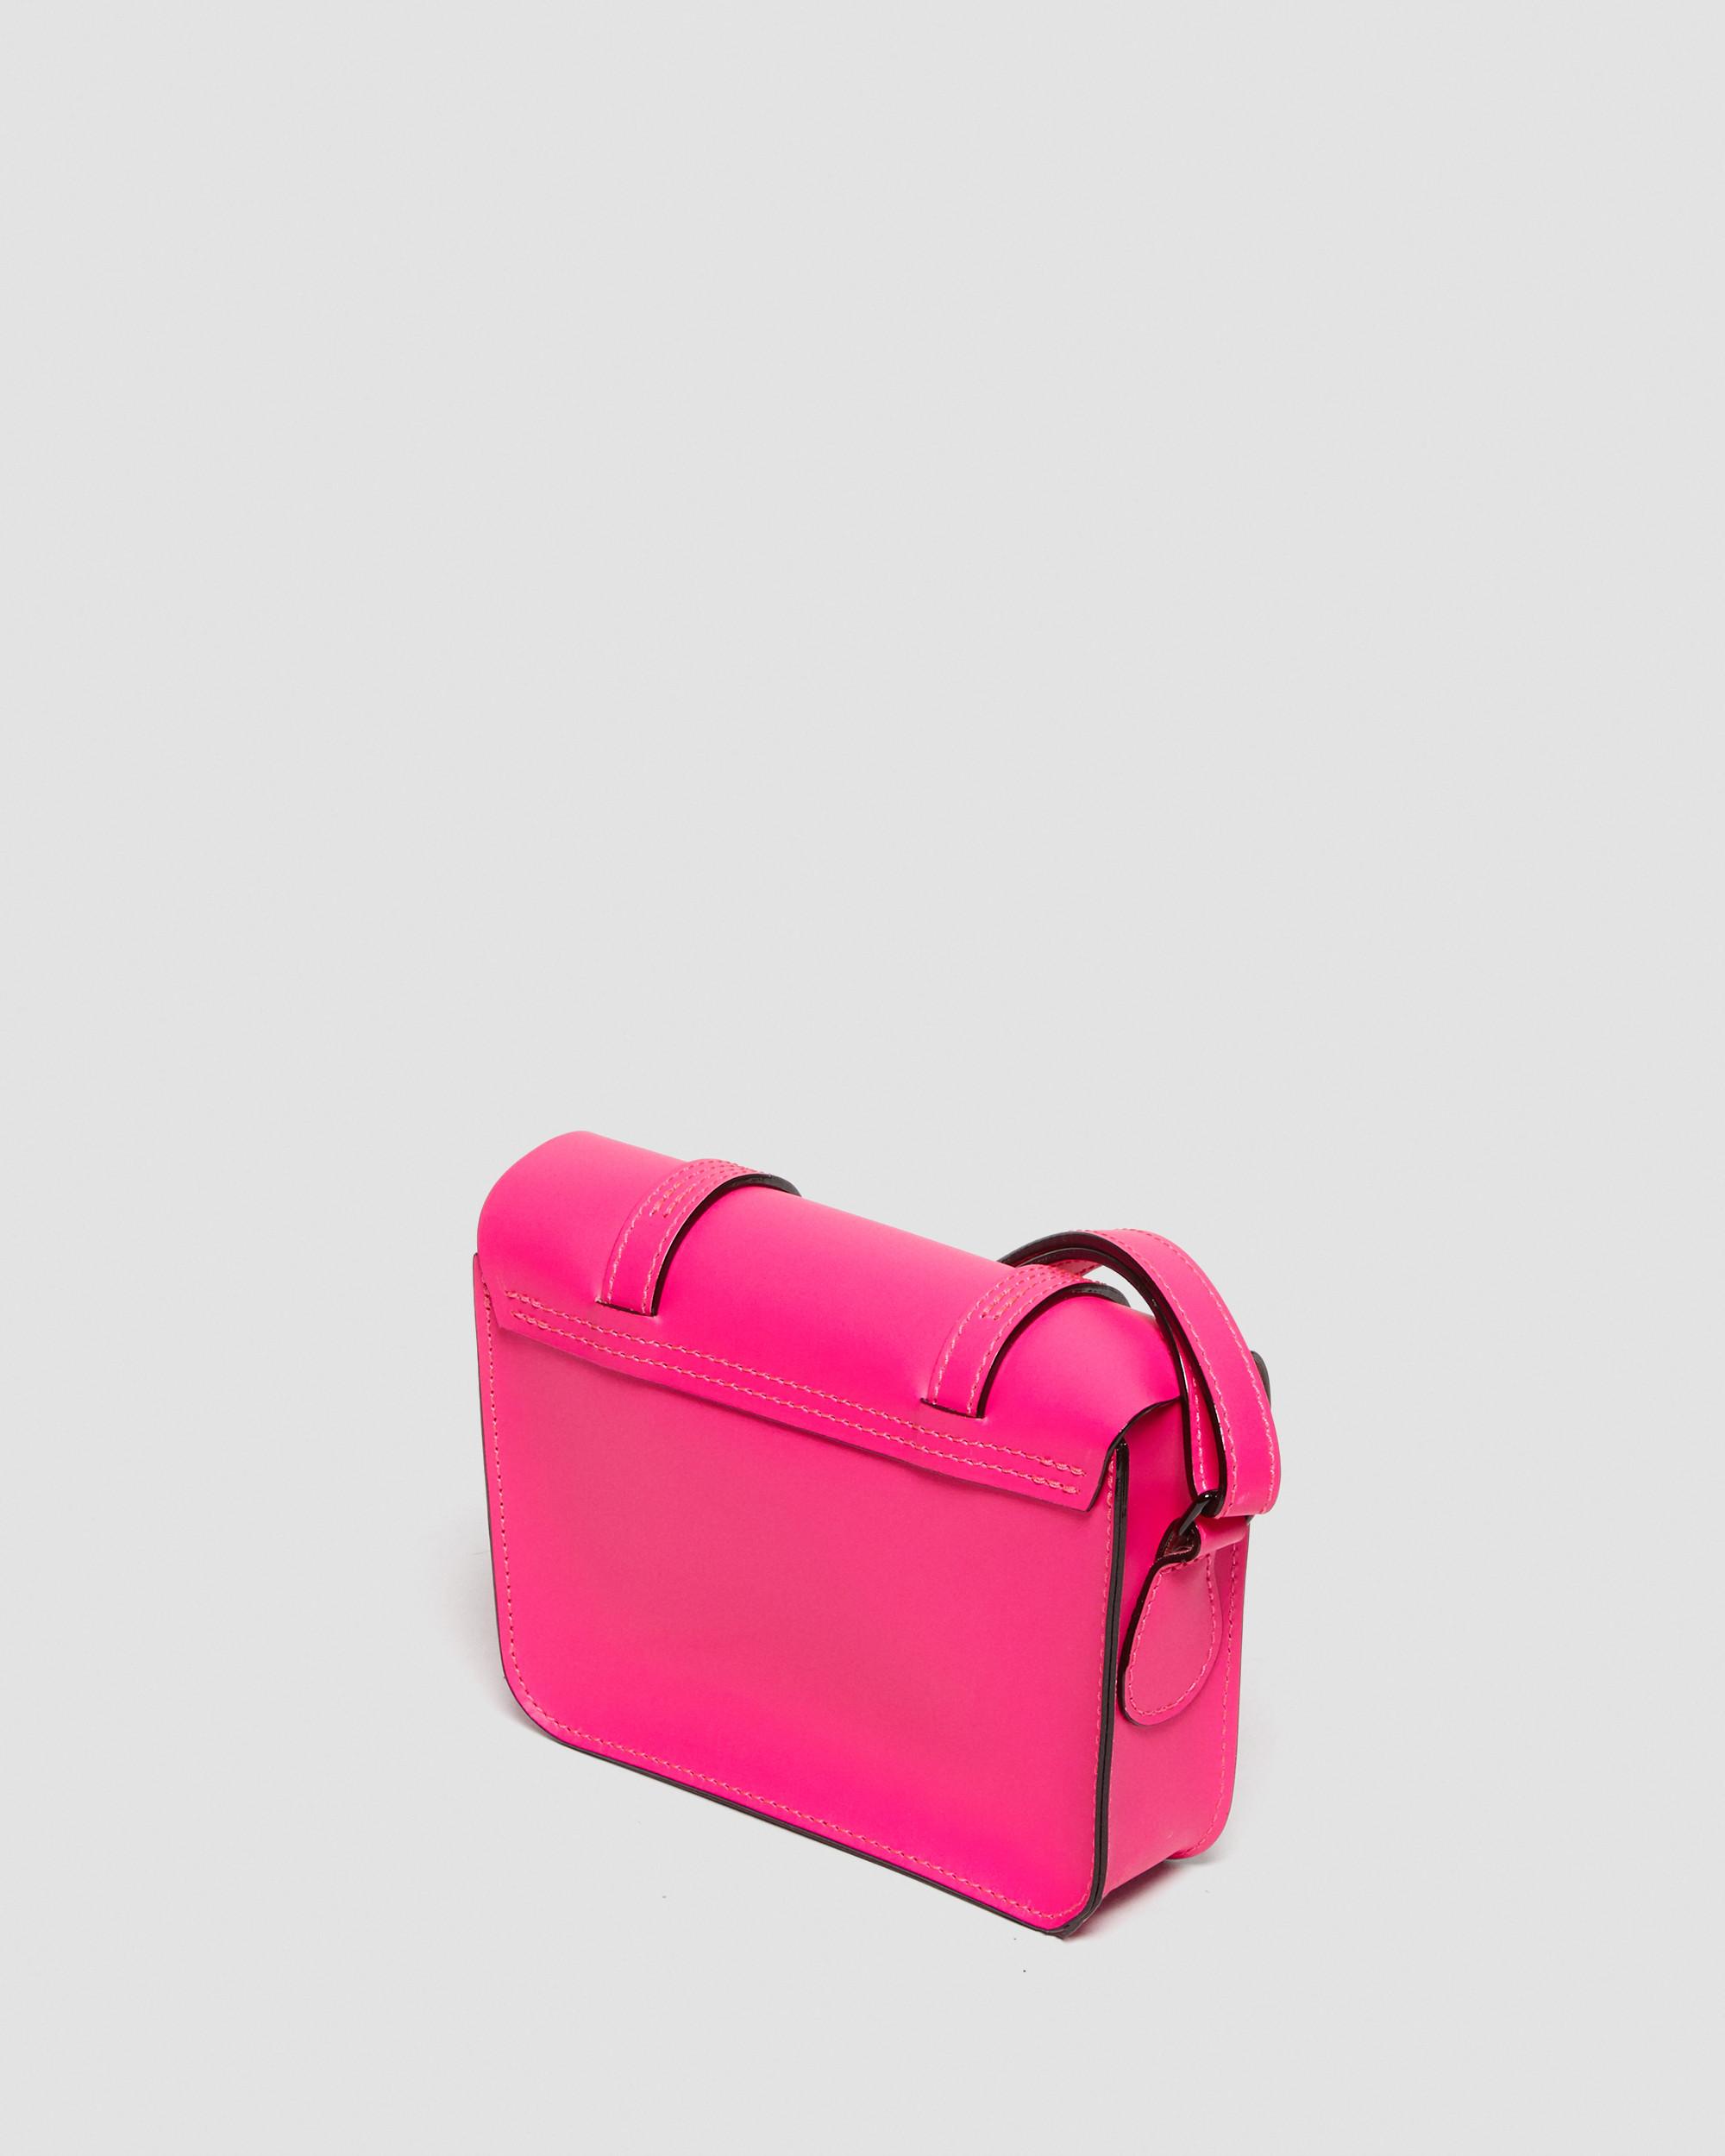 Roxie Leather Frame Crossbody Bag in Pink/Red